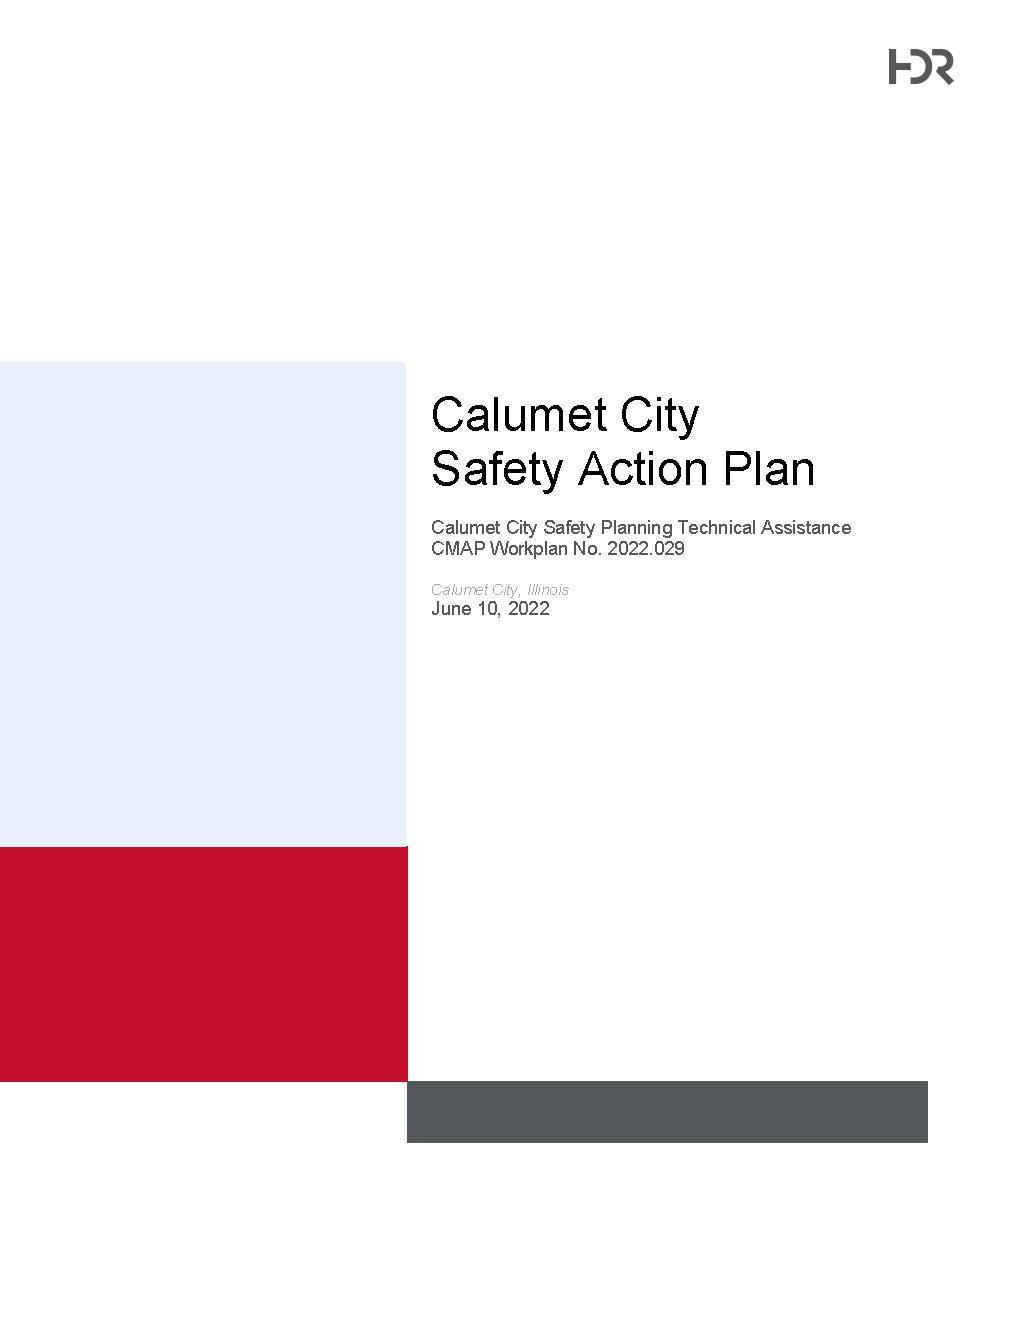 Calumet City Safety Action Plan cover